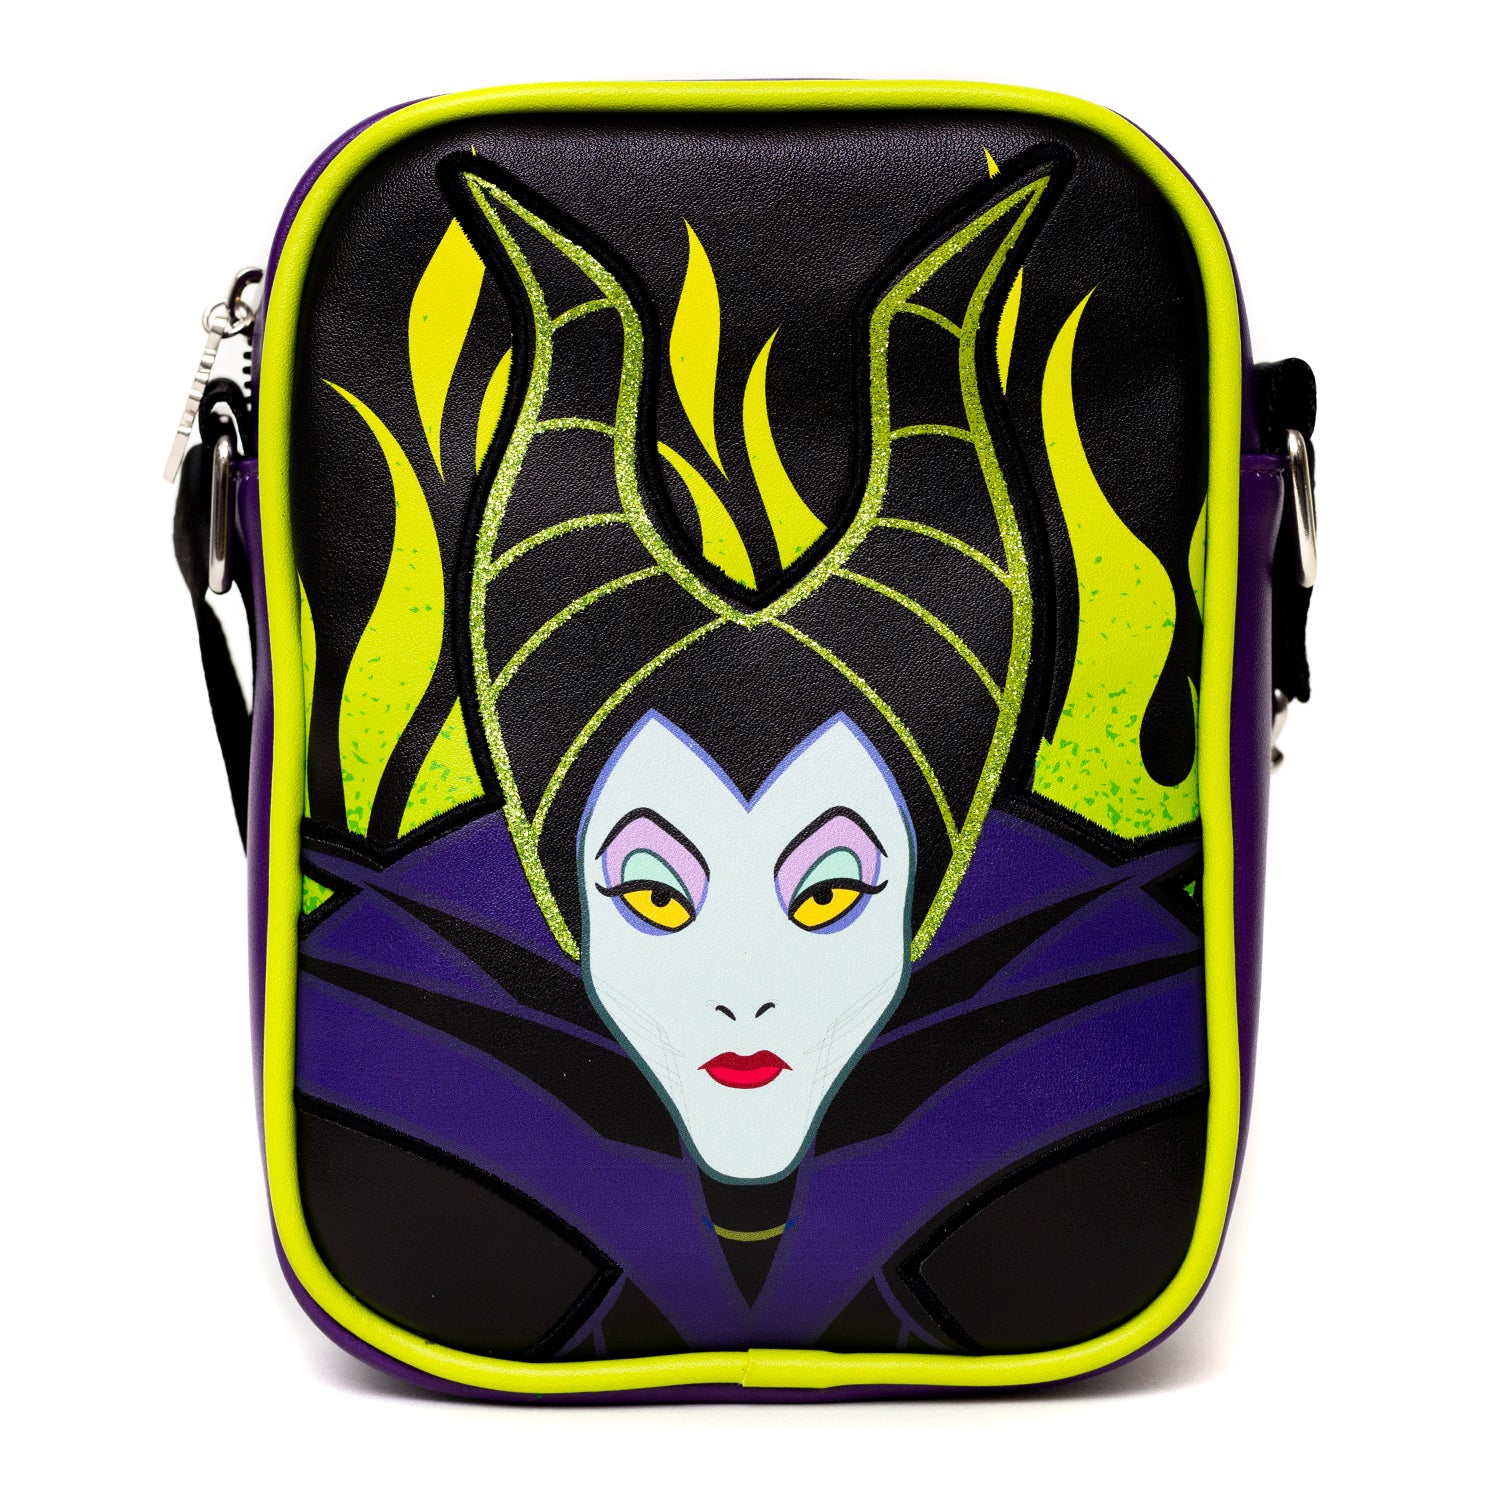 Loungefly, Bags, Maleficent Loungefly Wallet